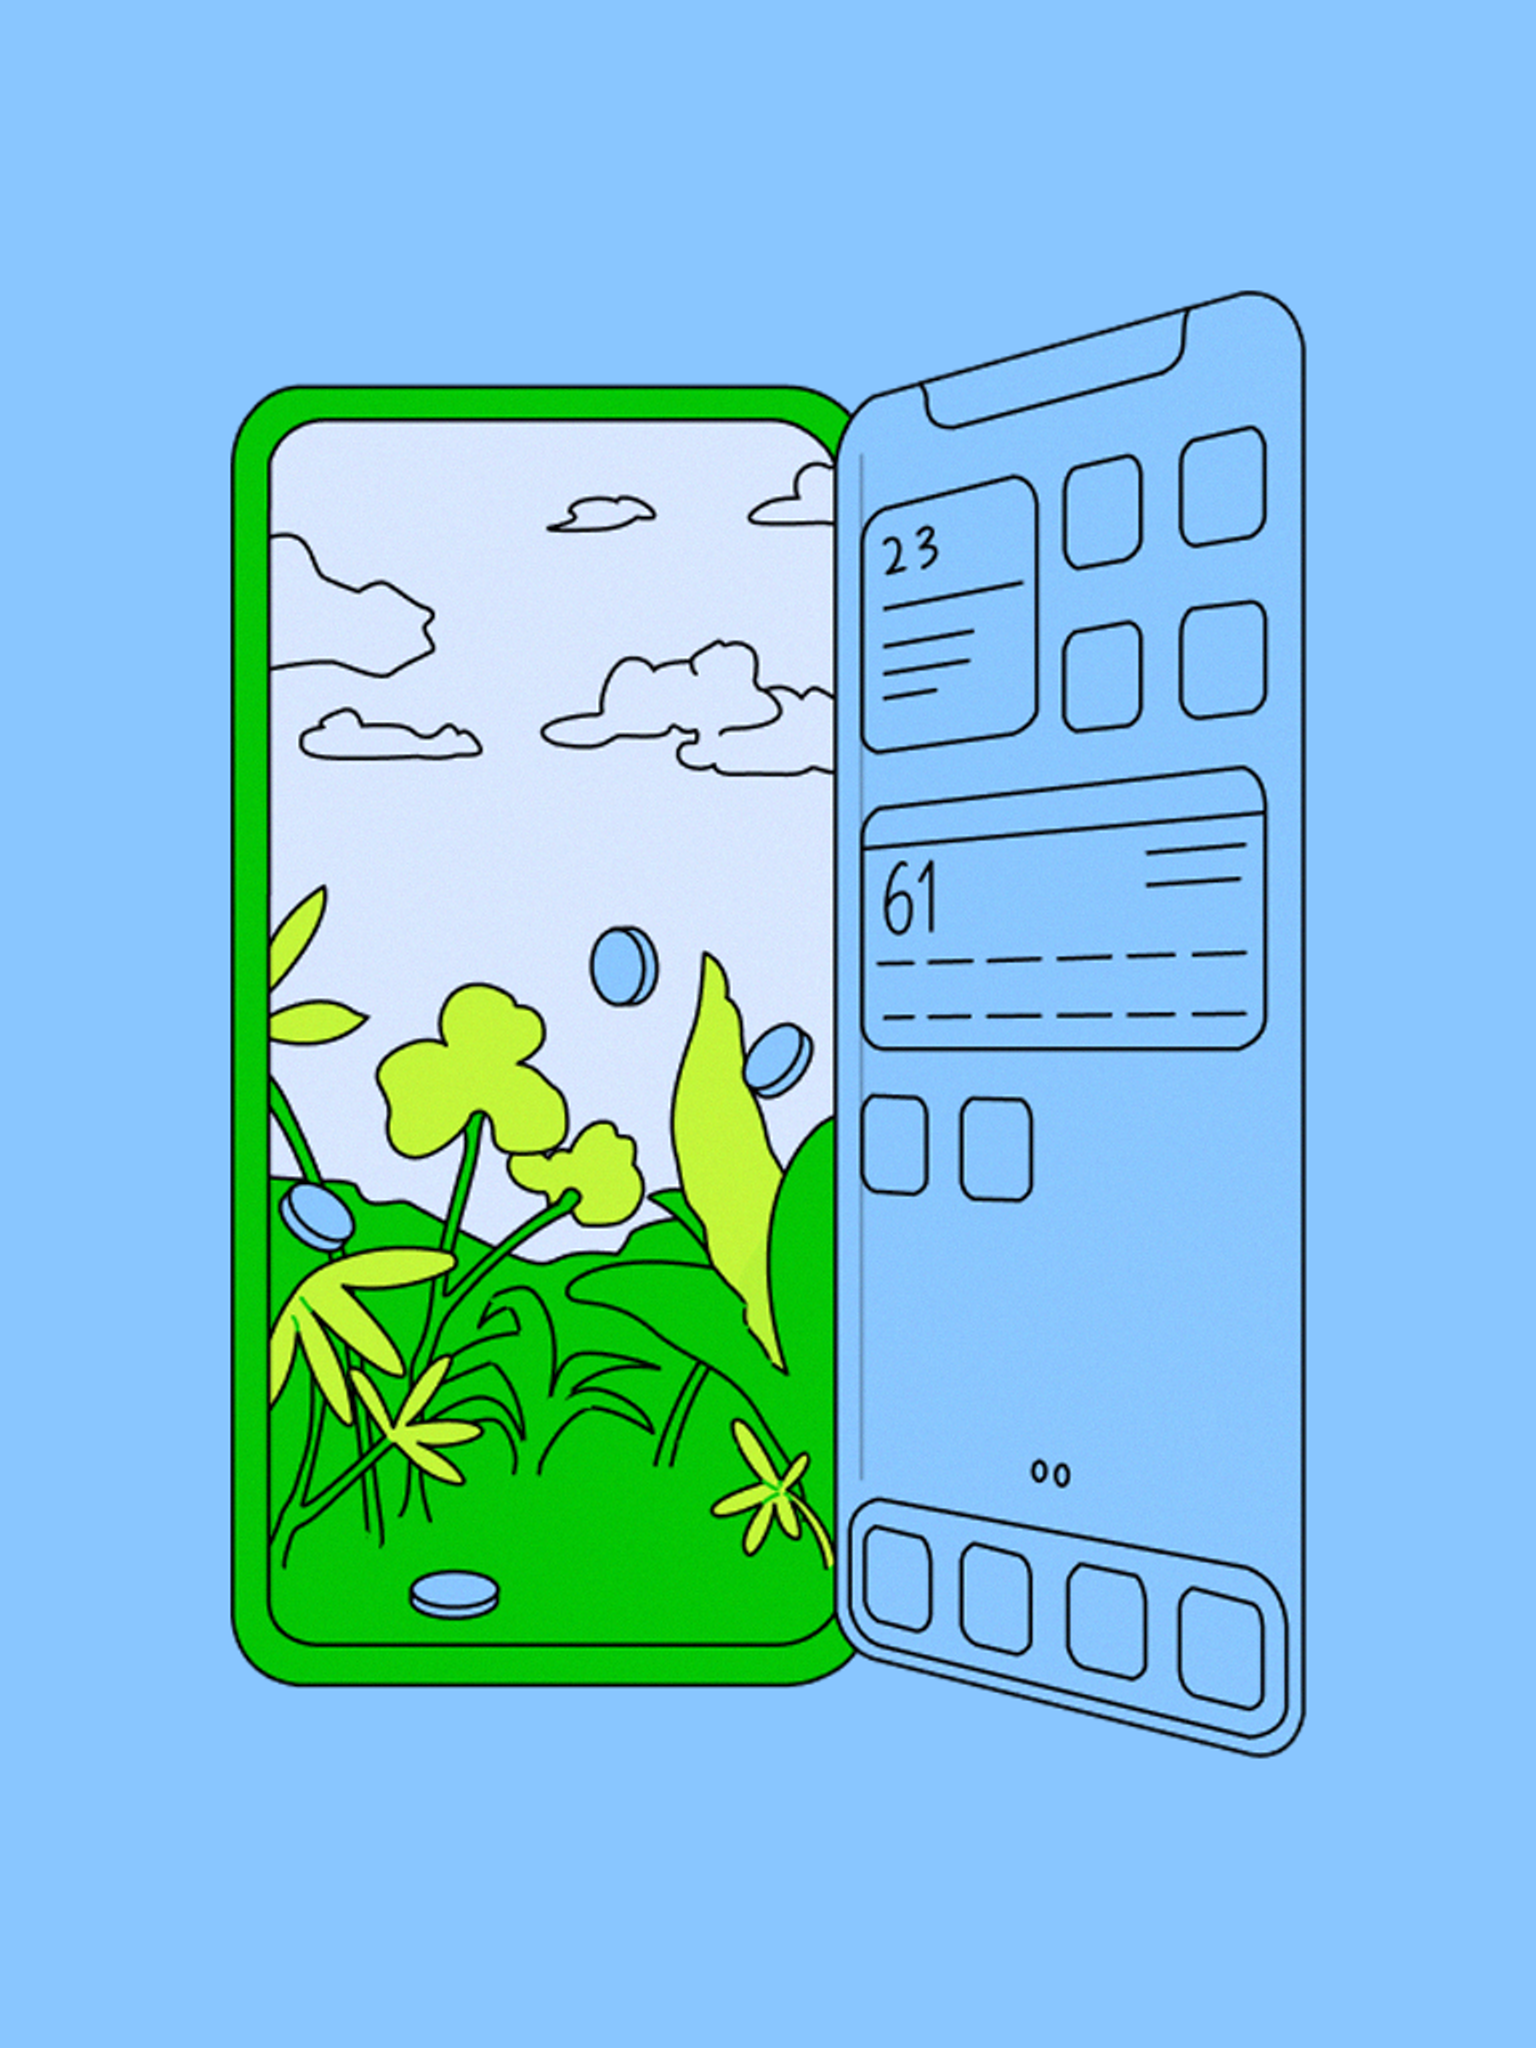 Illustration of two smartphones: one displays a nature scene, the other shows a user interface with apps.